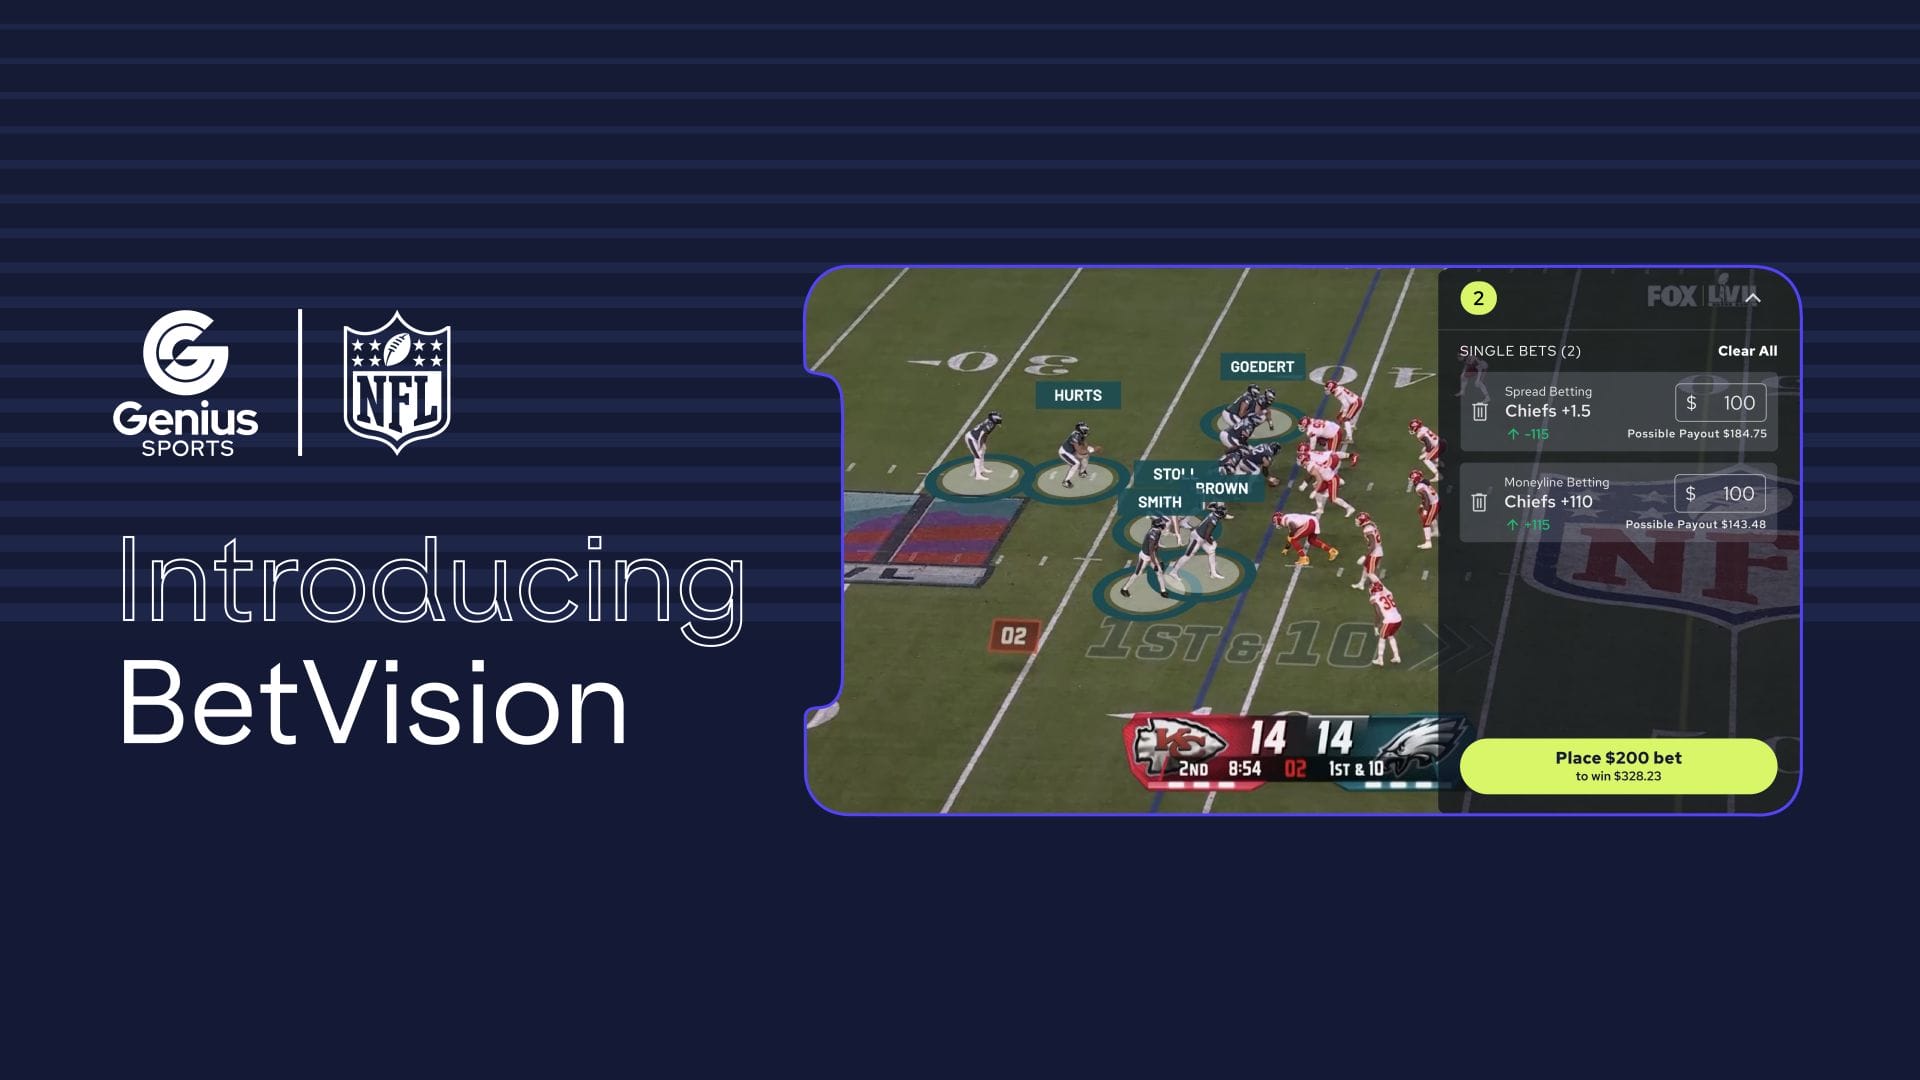 Genius Sports launches BetVision, an immersive sports betting experience including NFL live game video